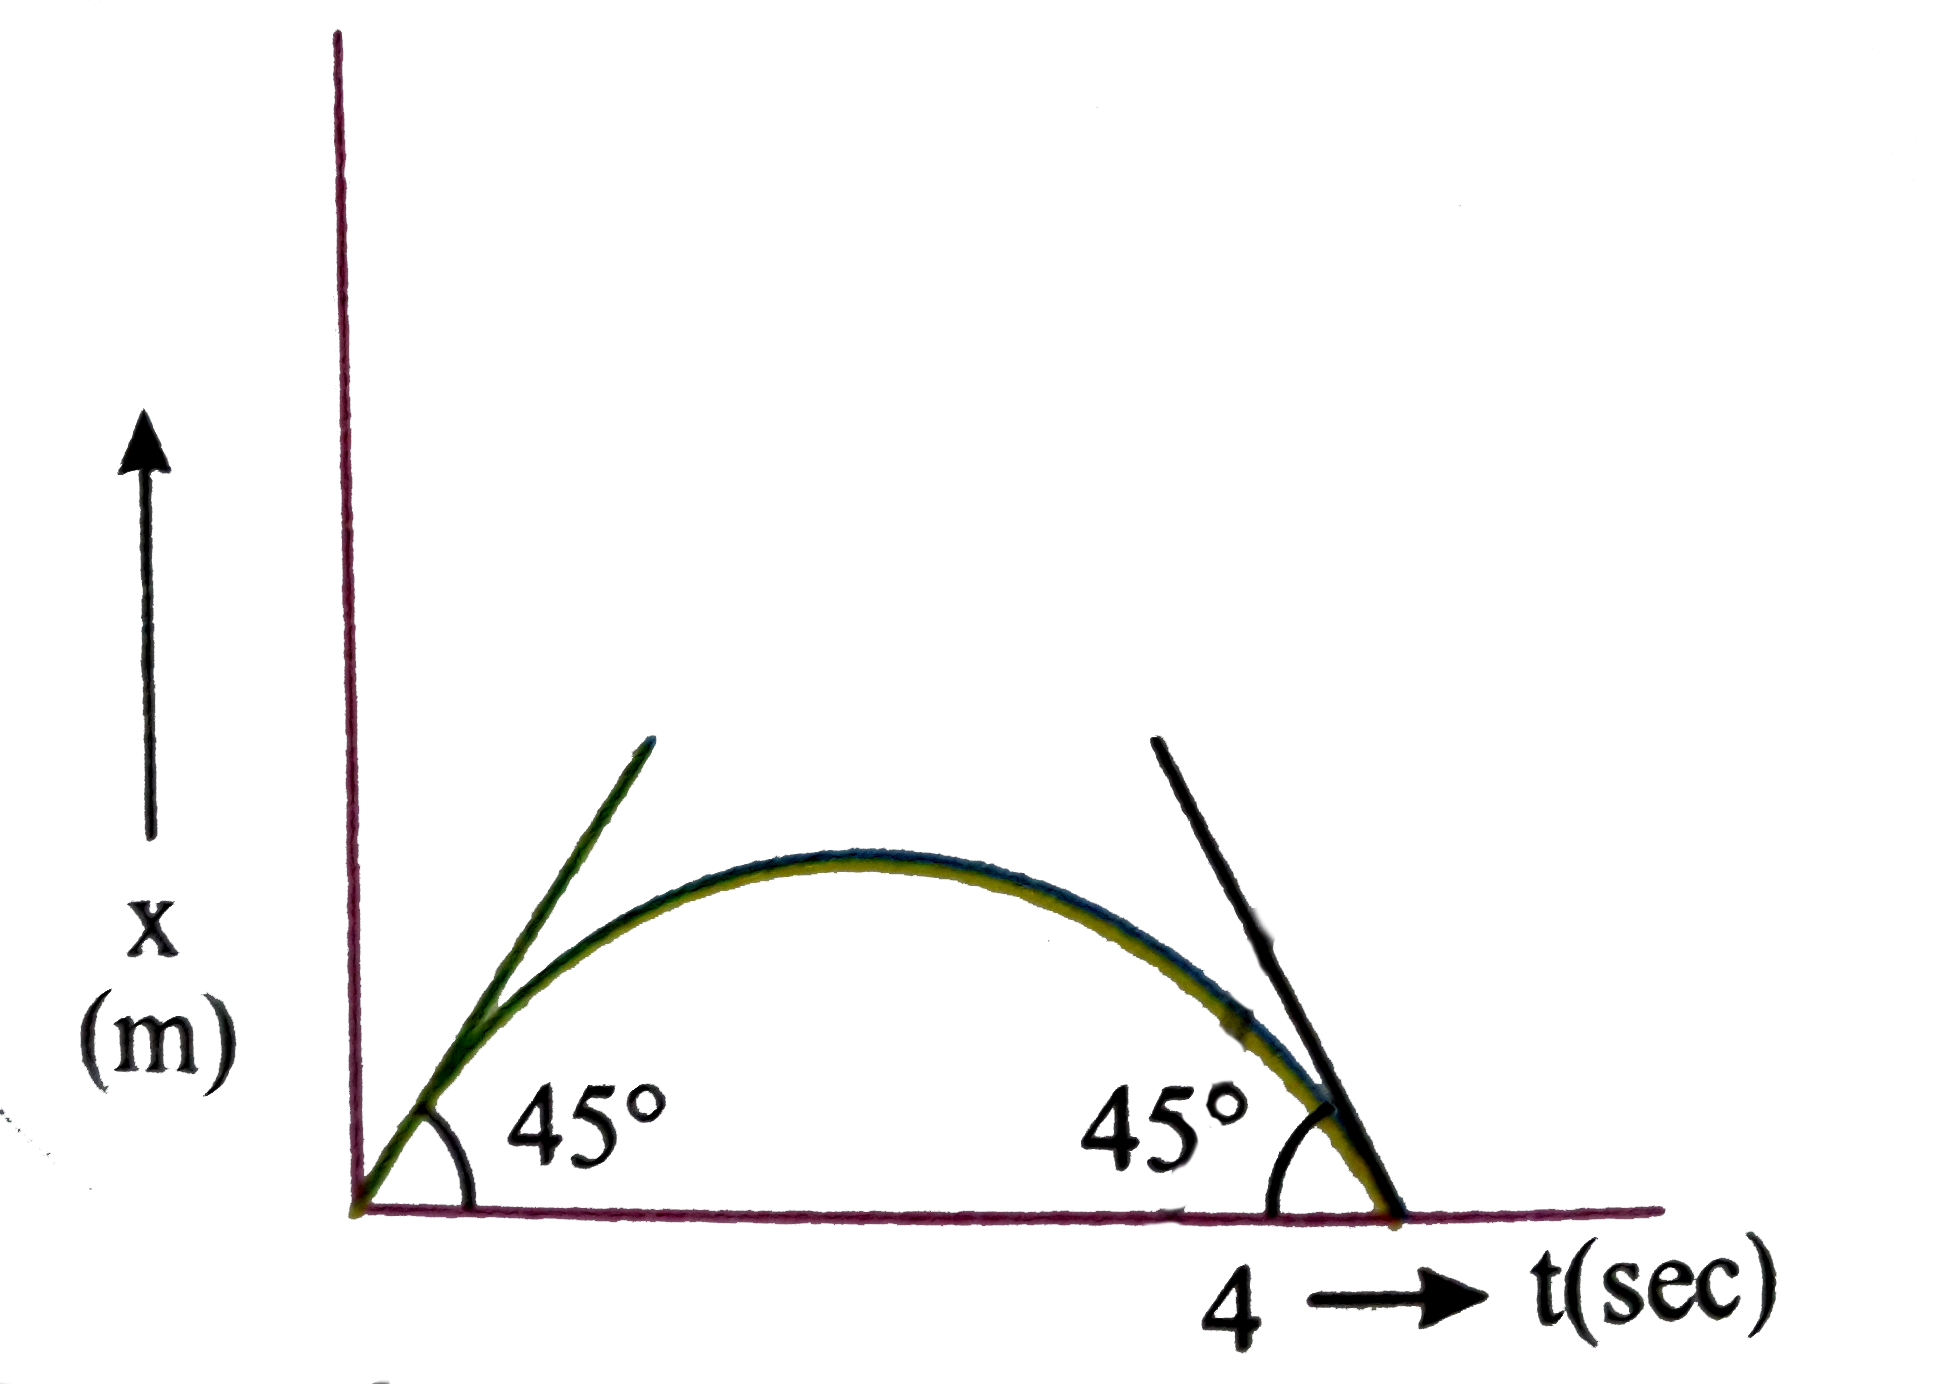 A particle moves along x-axis with constant acceleration and its x-position depend on time t as shown in the following graph (parabola),then in interval 0 to 4 sec.